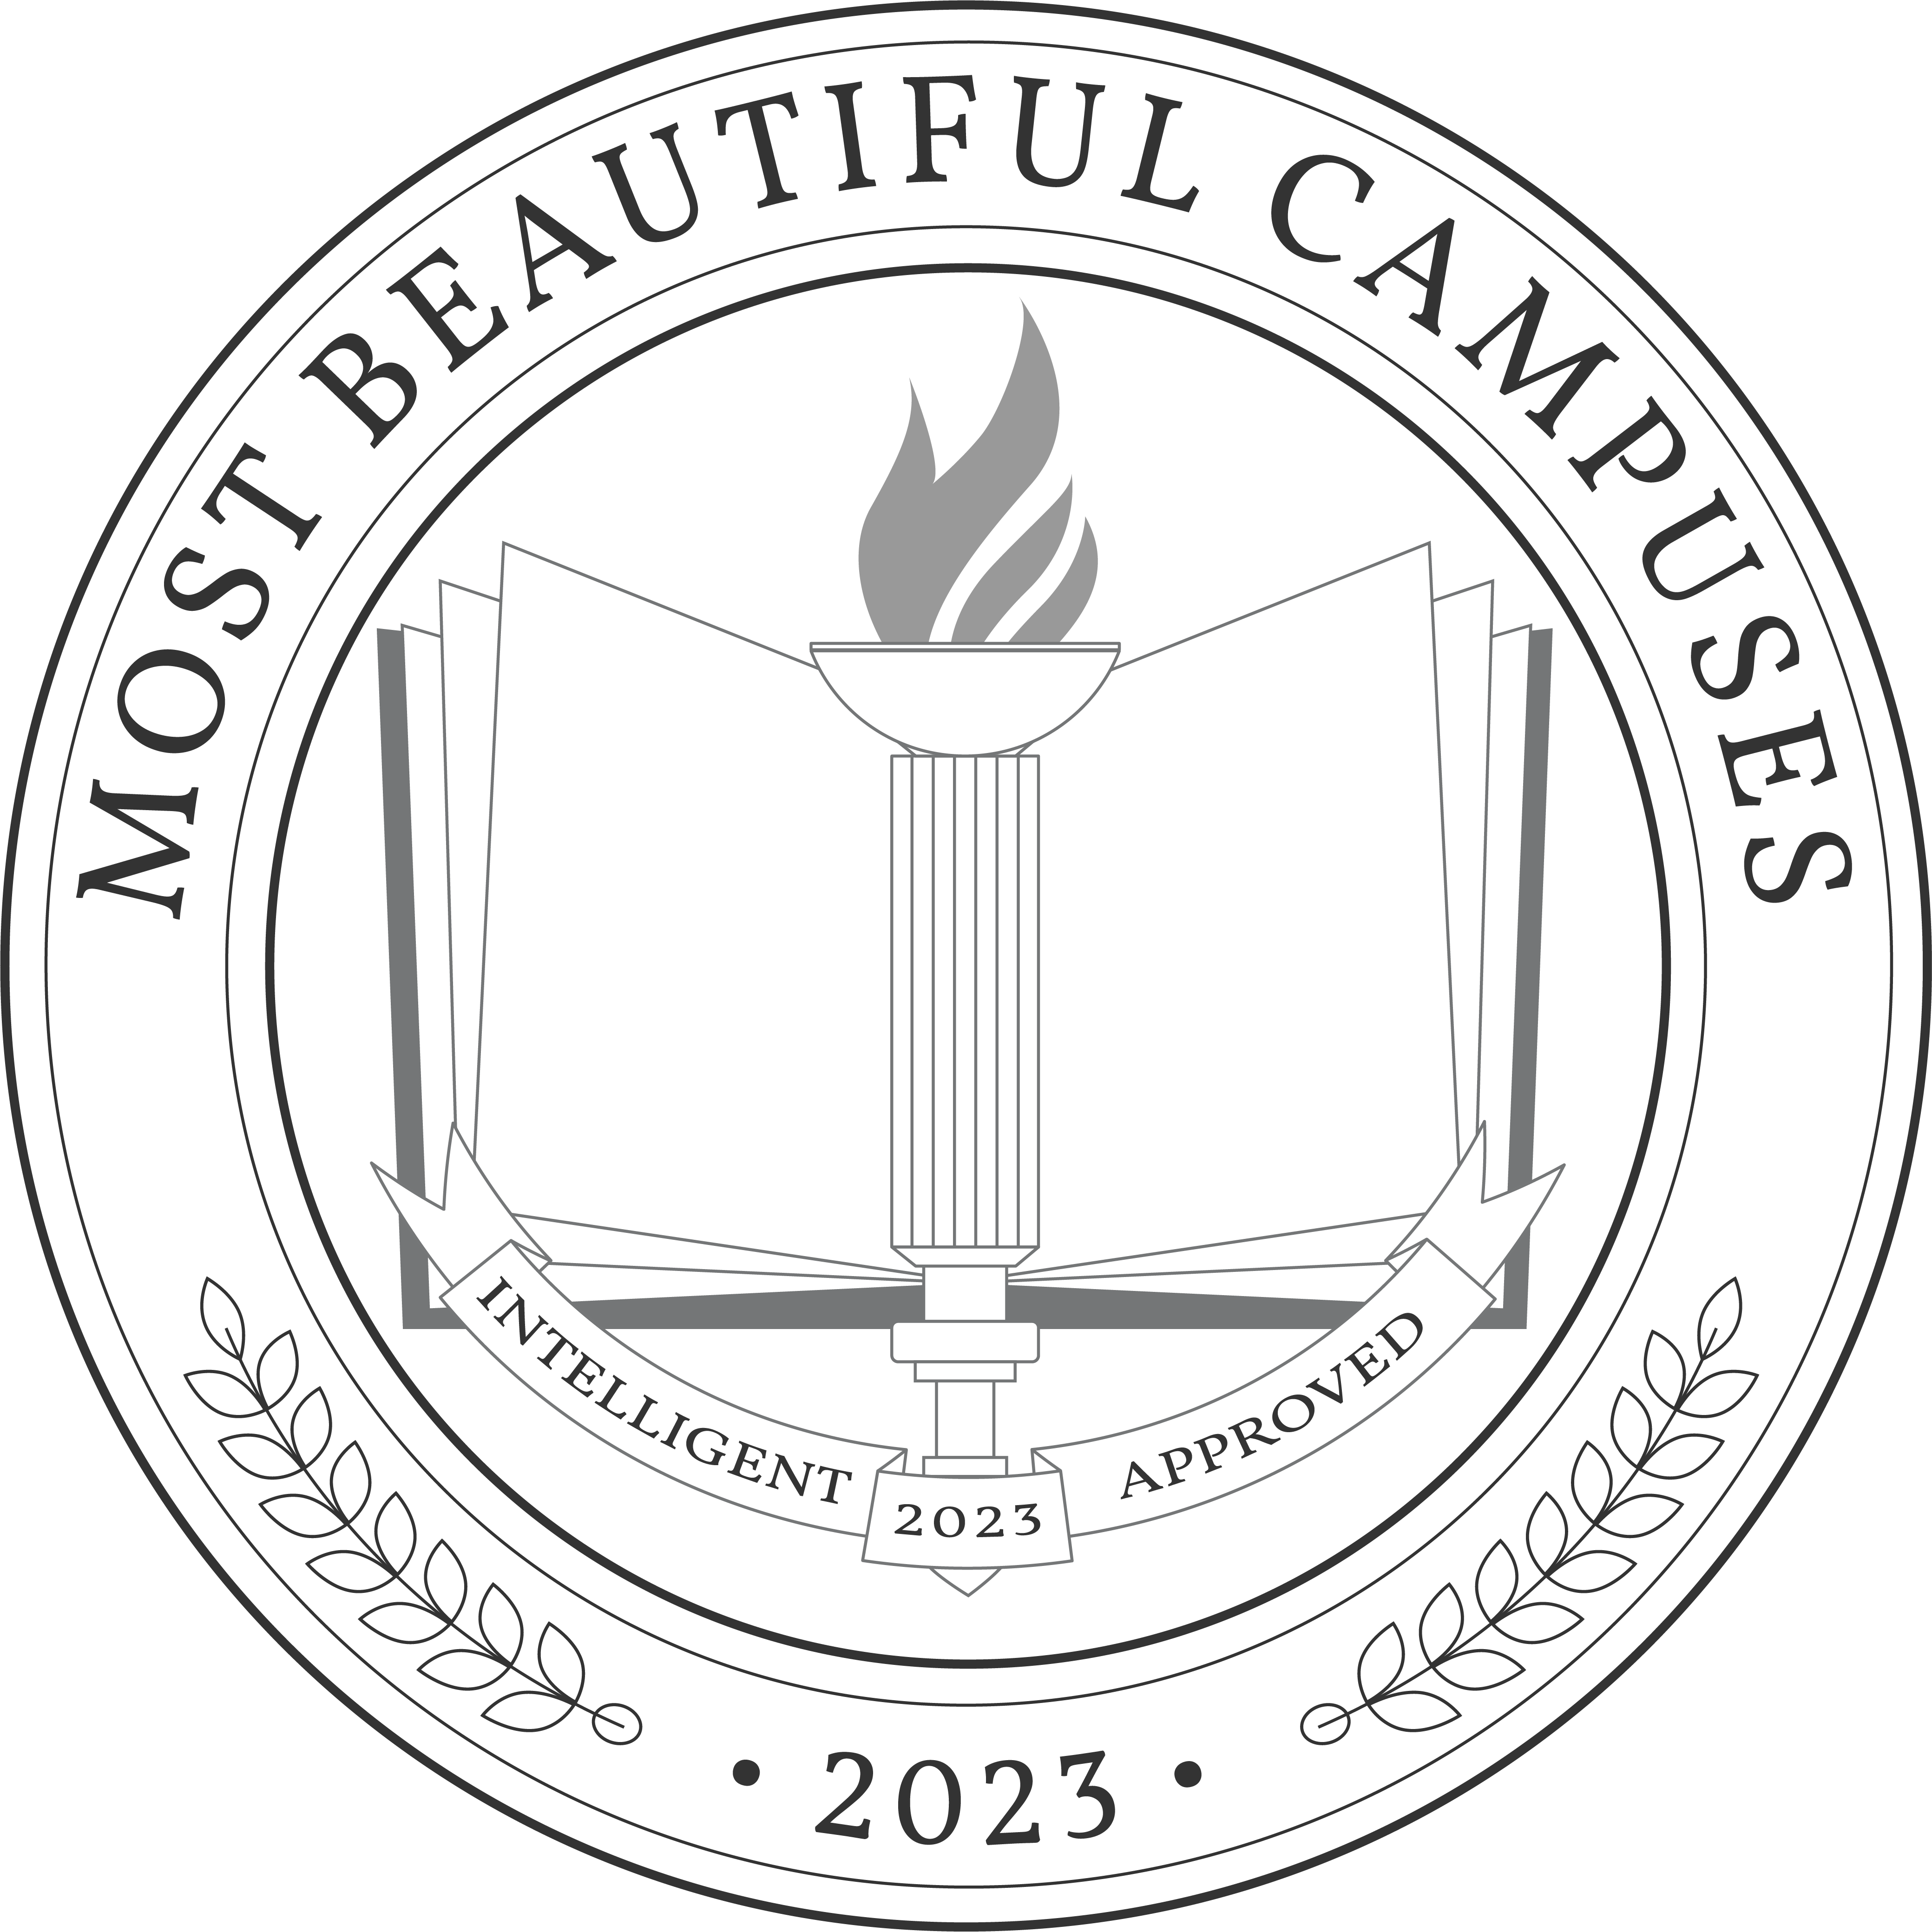 Most Beautiful Campuses badge